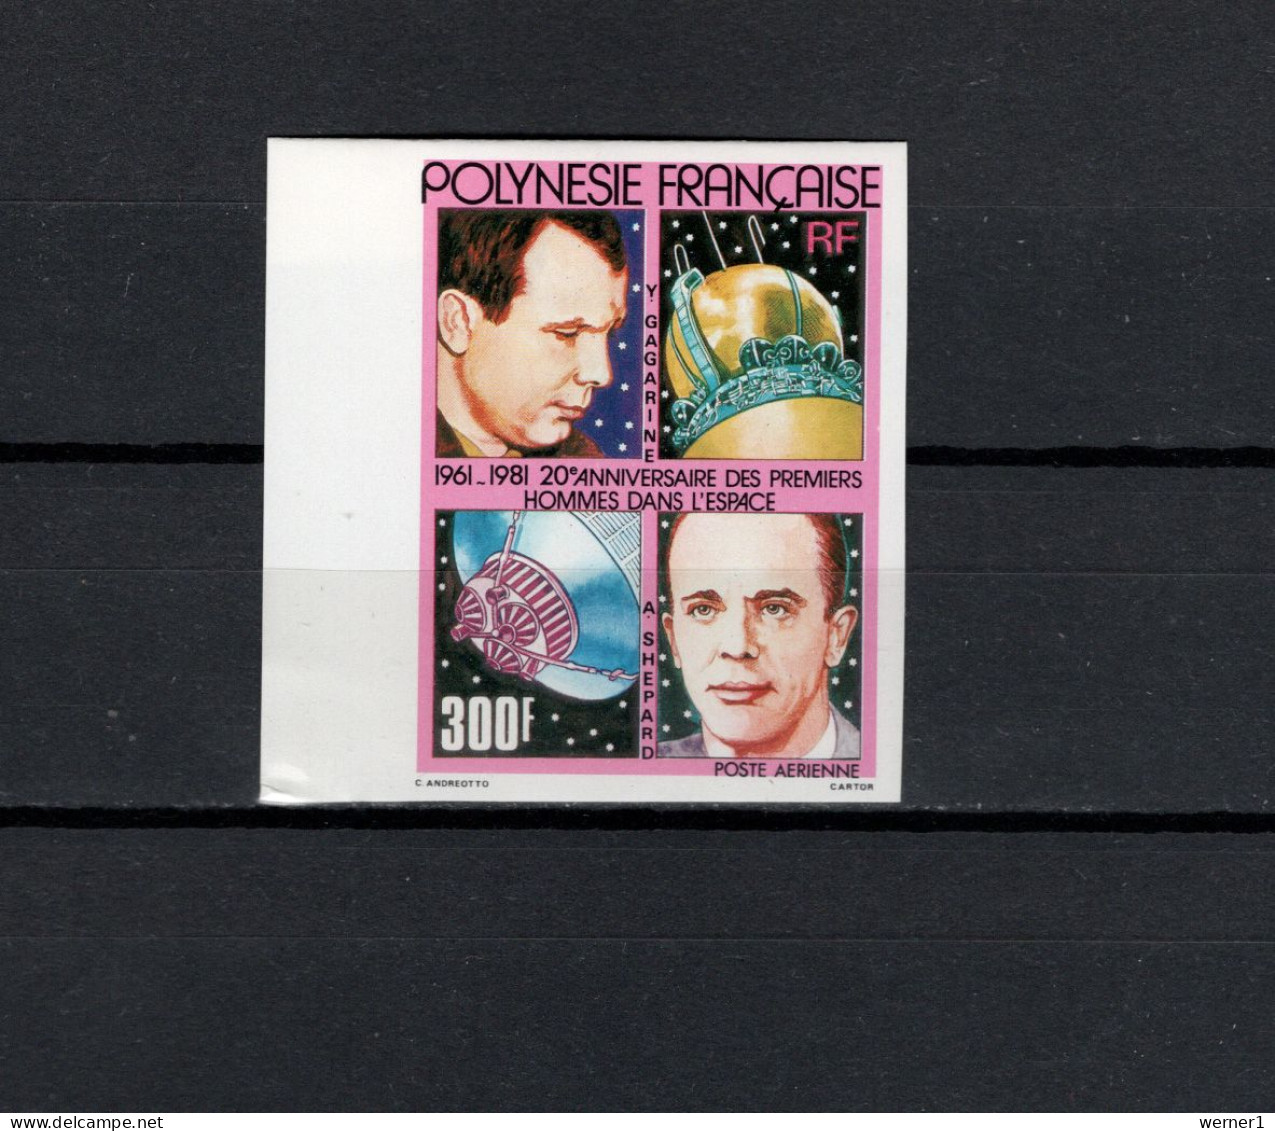 French Polynesia 1981 Space, 20th Anniversary Of Manned Spaceflight Stamp Imperf. MNH -scarce- - Océanie